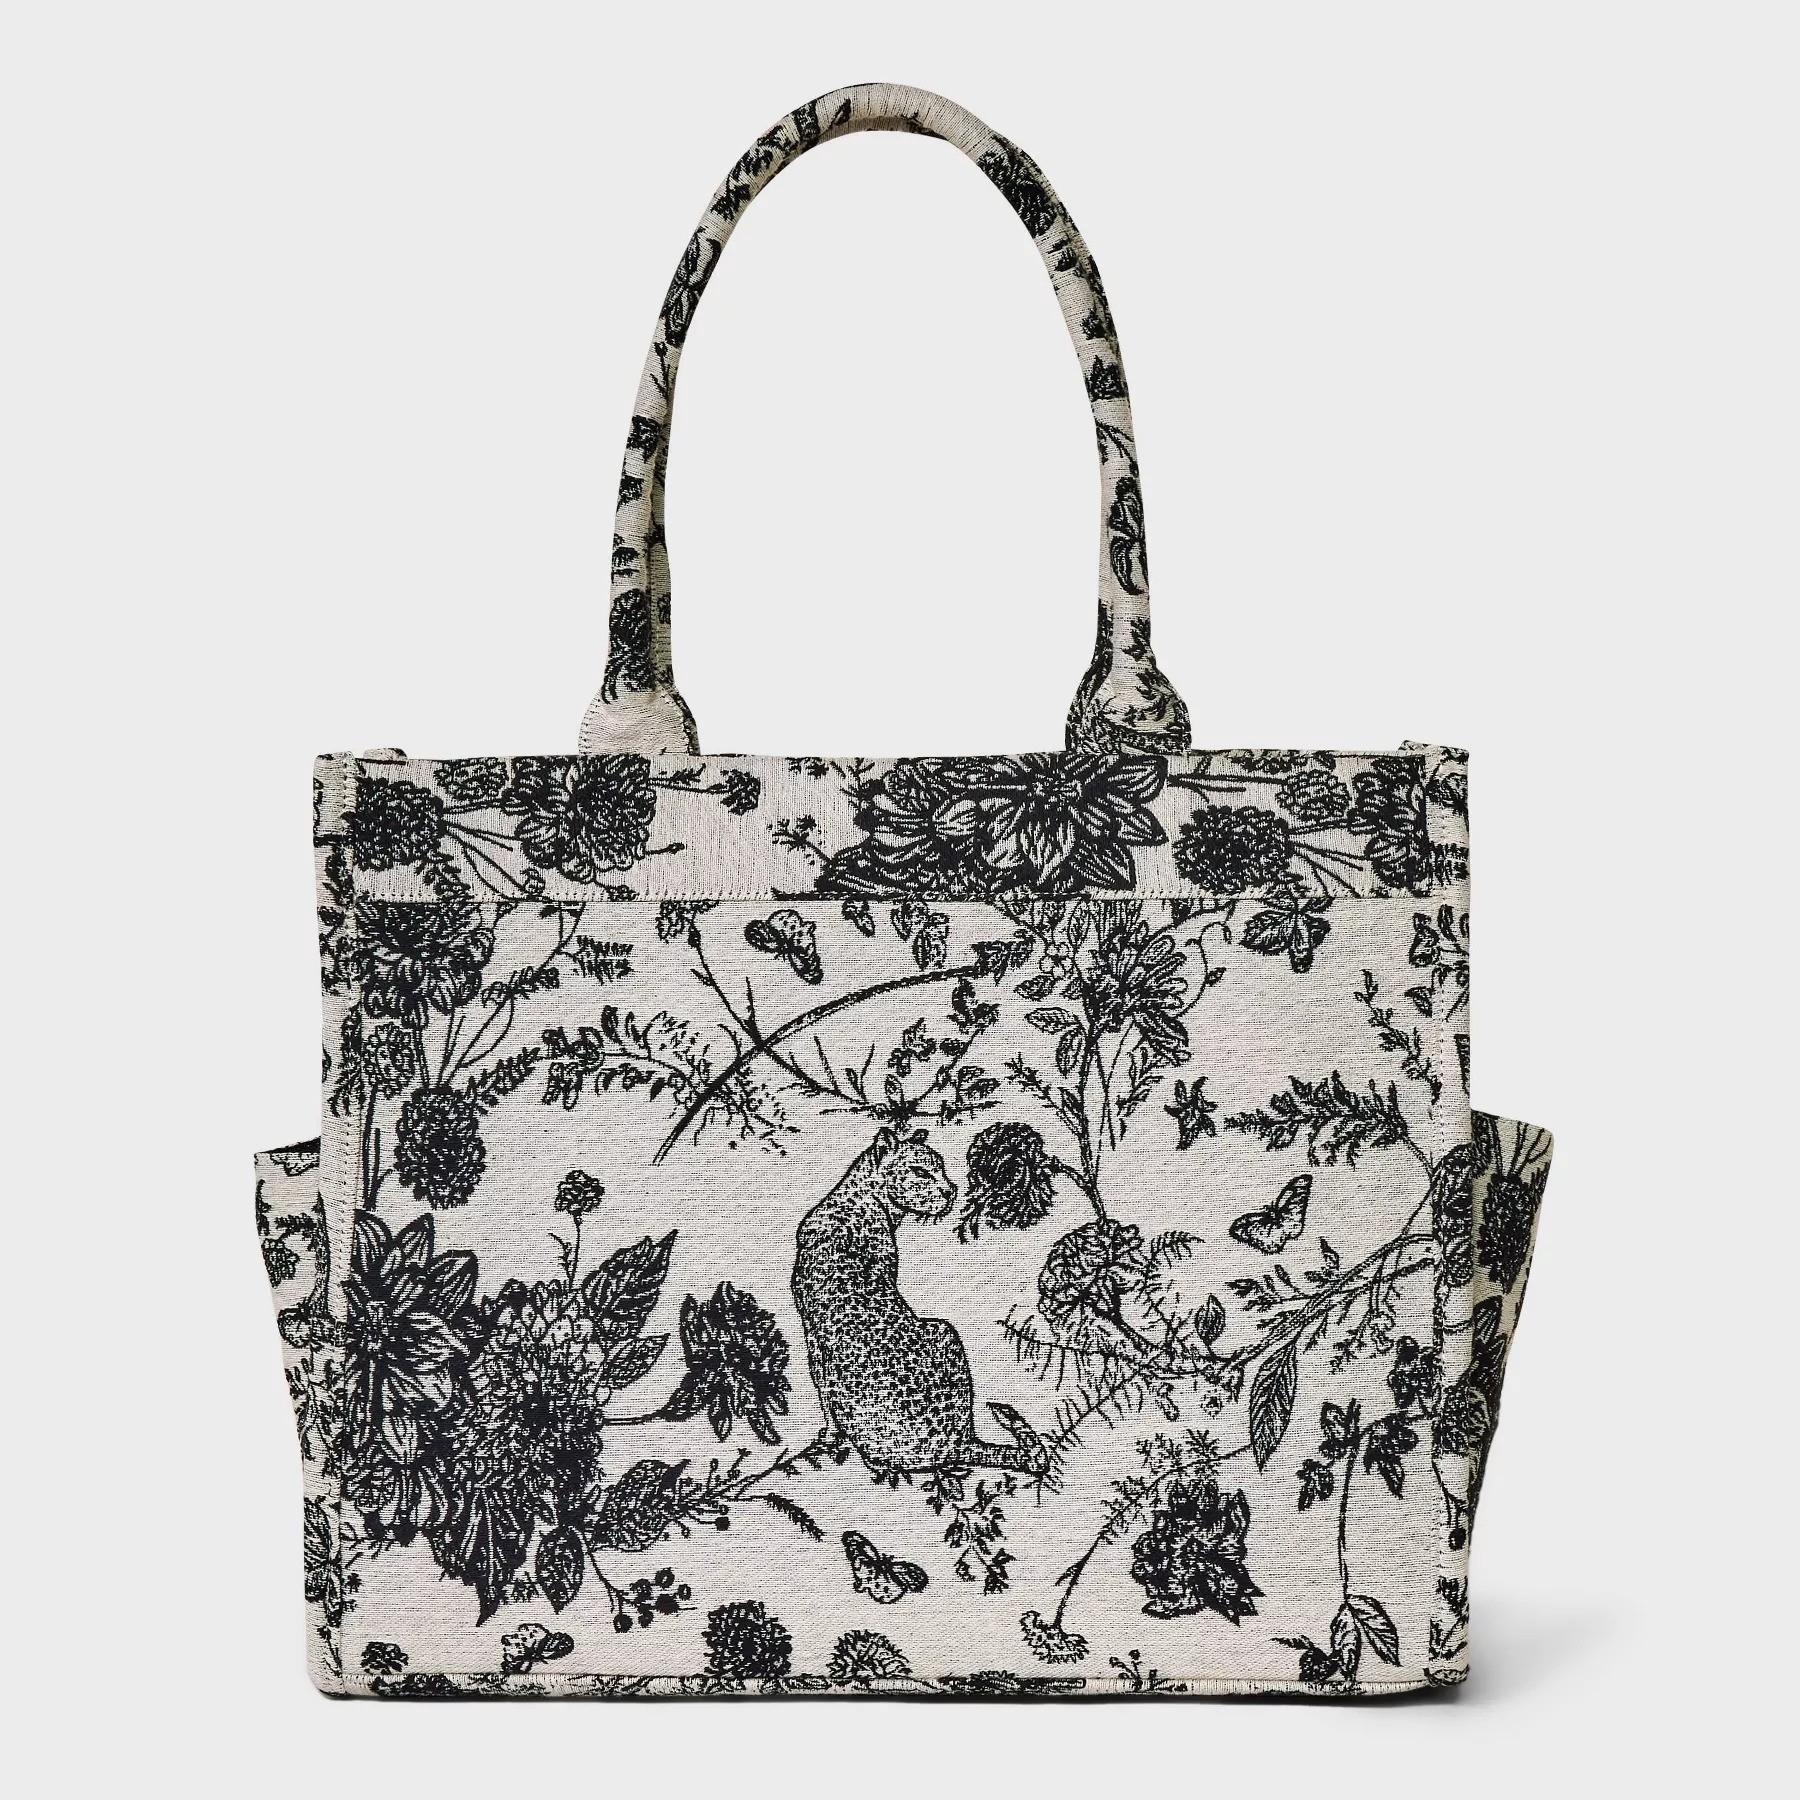 Black and beige floral print tote bag with dual handles